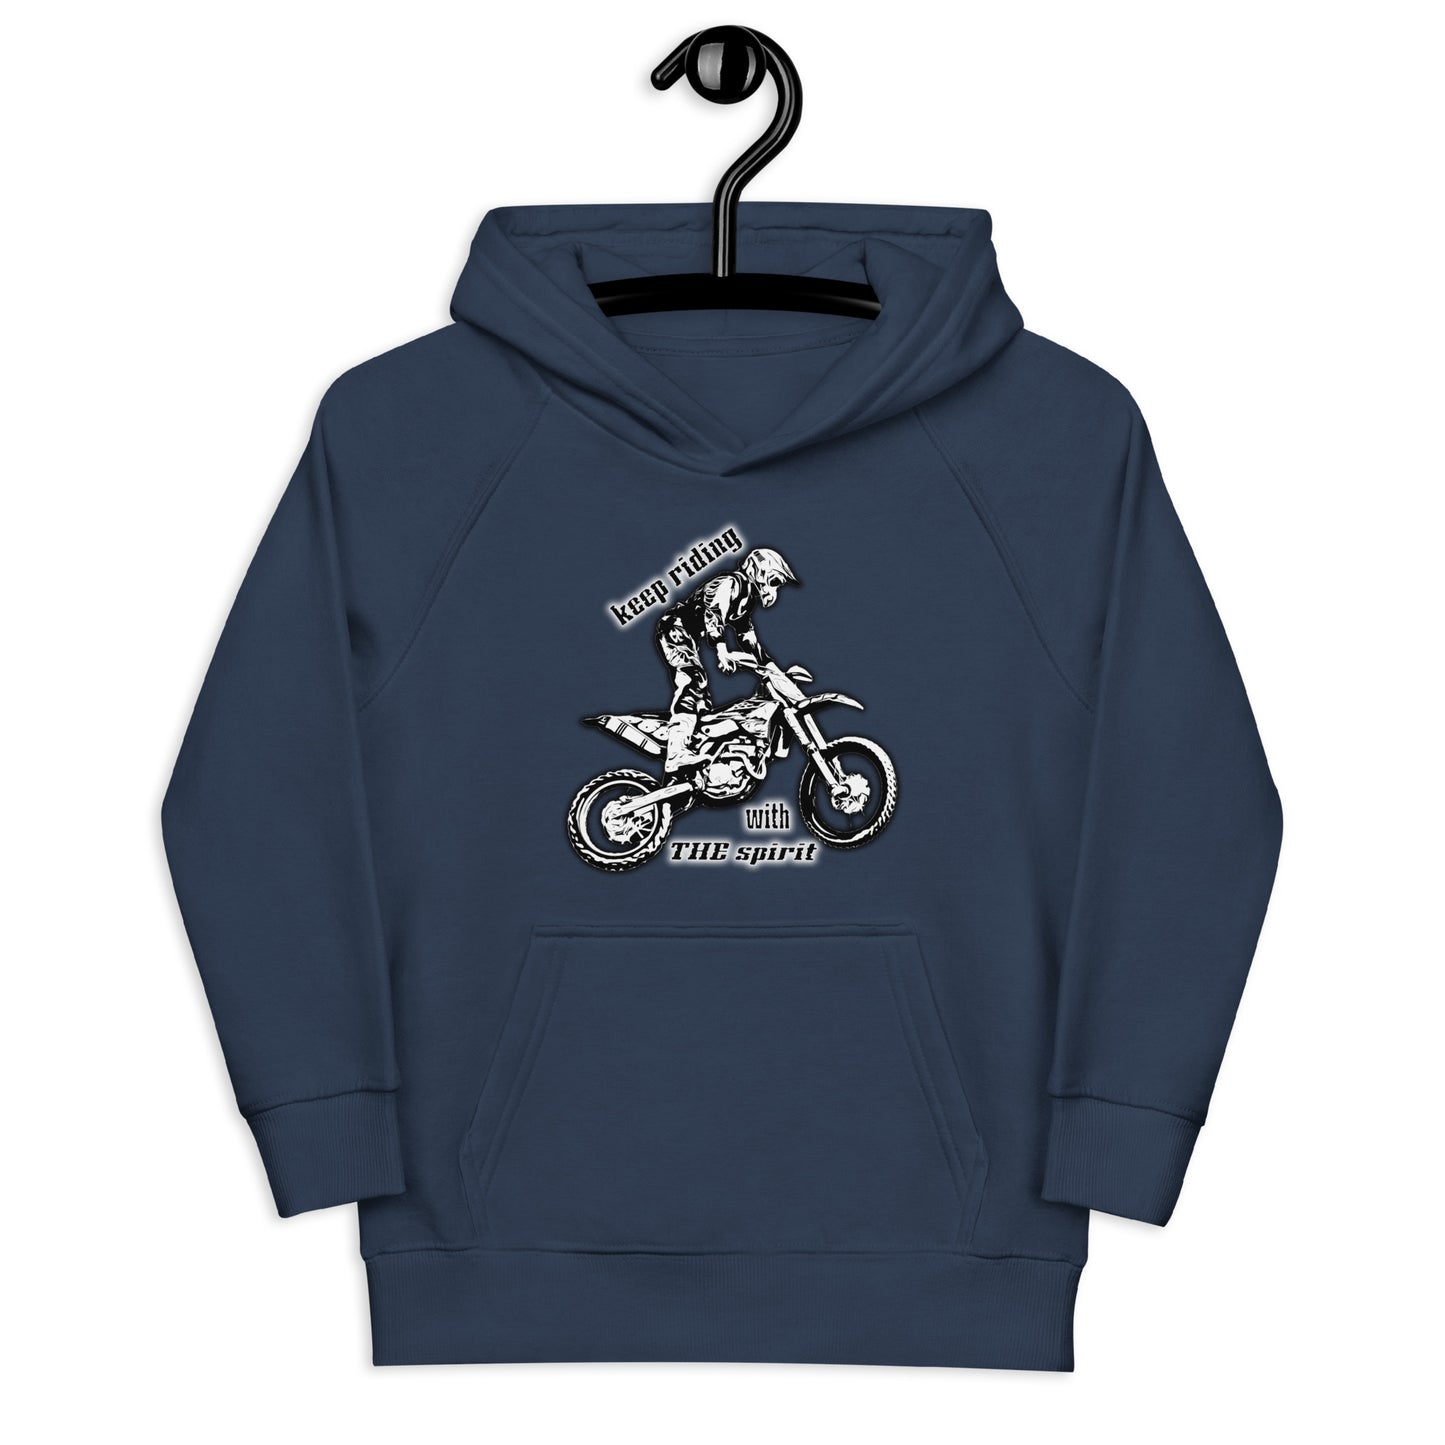 Keep riding with THE spirit - Hoodie- Kinder